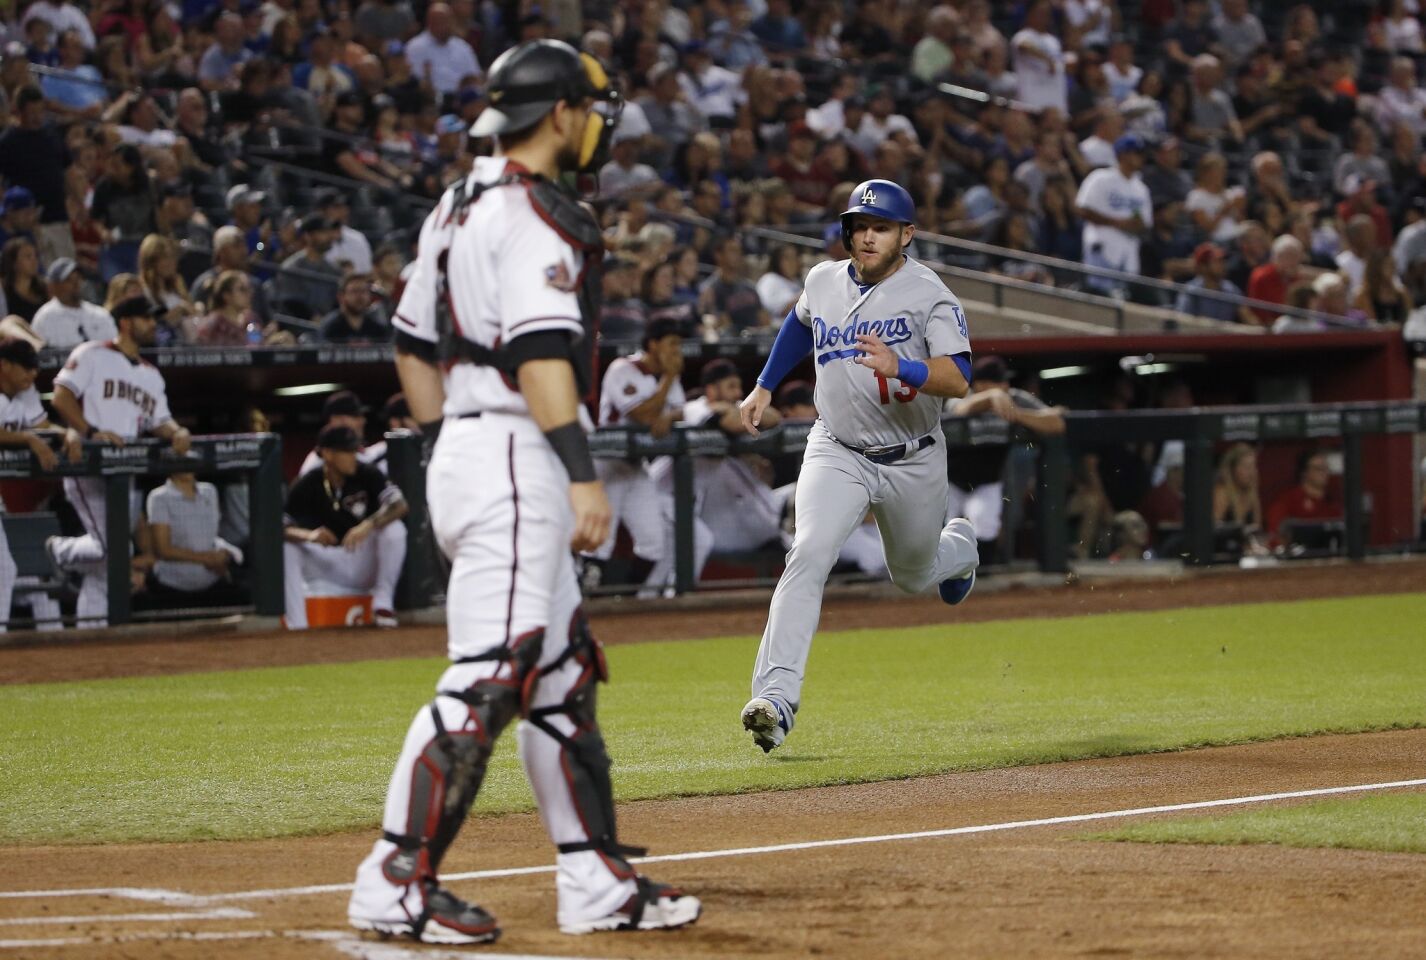 Los Angeles Dodgers' Max Muncy, right, heads home to score as Arizona Diamondbacks catcher Jeff Mathis, left, waits for a possible throw during the first inning of a baseball game Wednesday, Sept. 26, 2018, in Phoenix. (AP Photo/Ross D. Franklin)